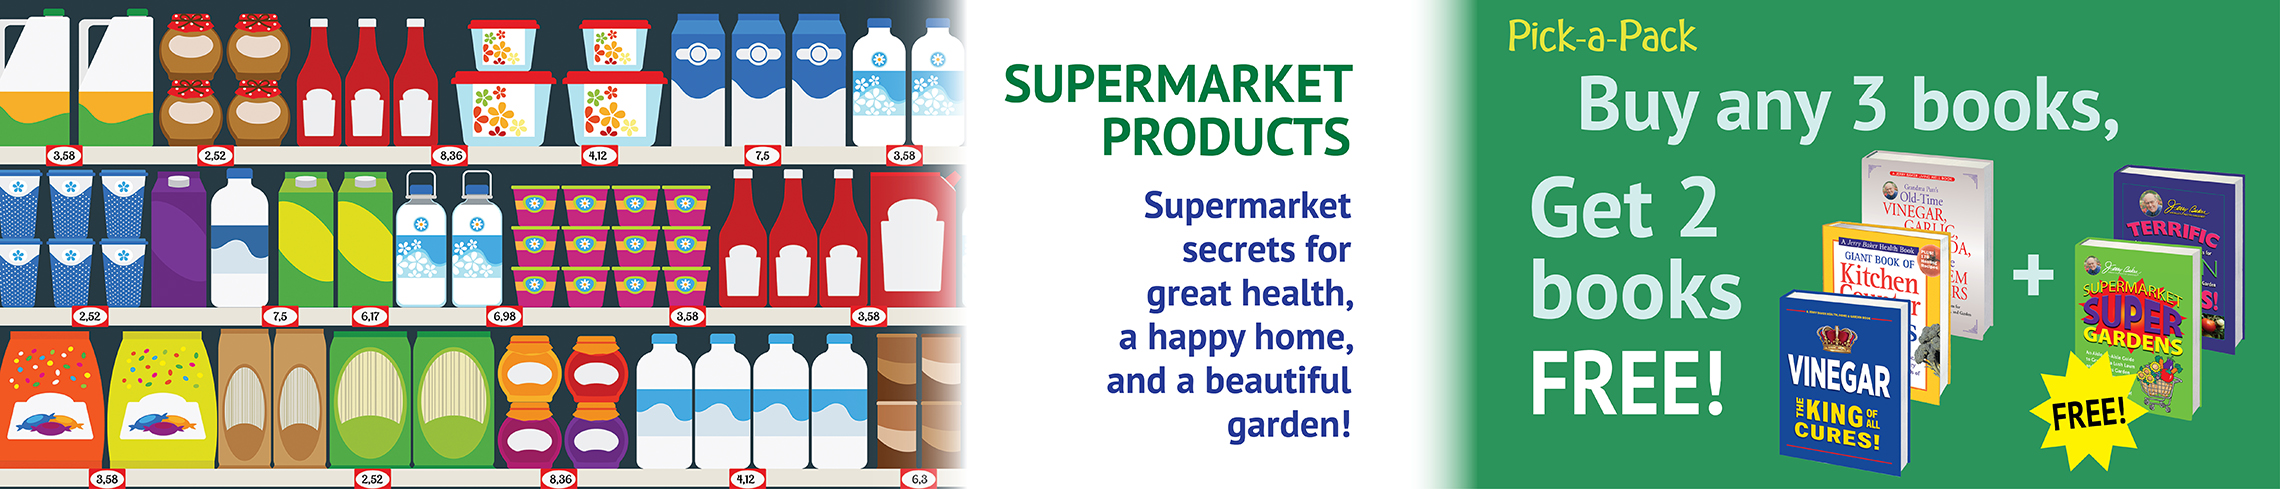 Supermarket Products